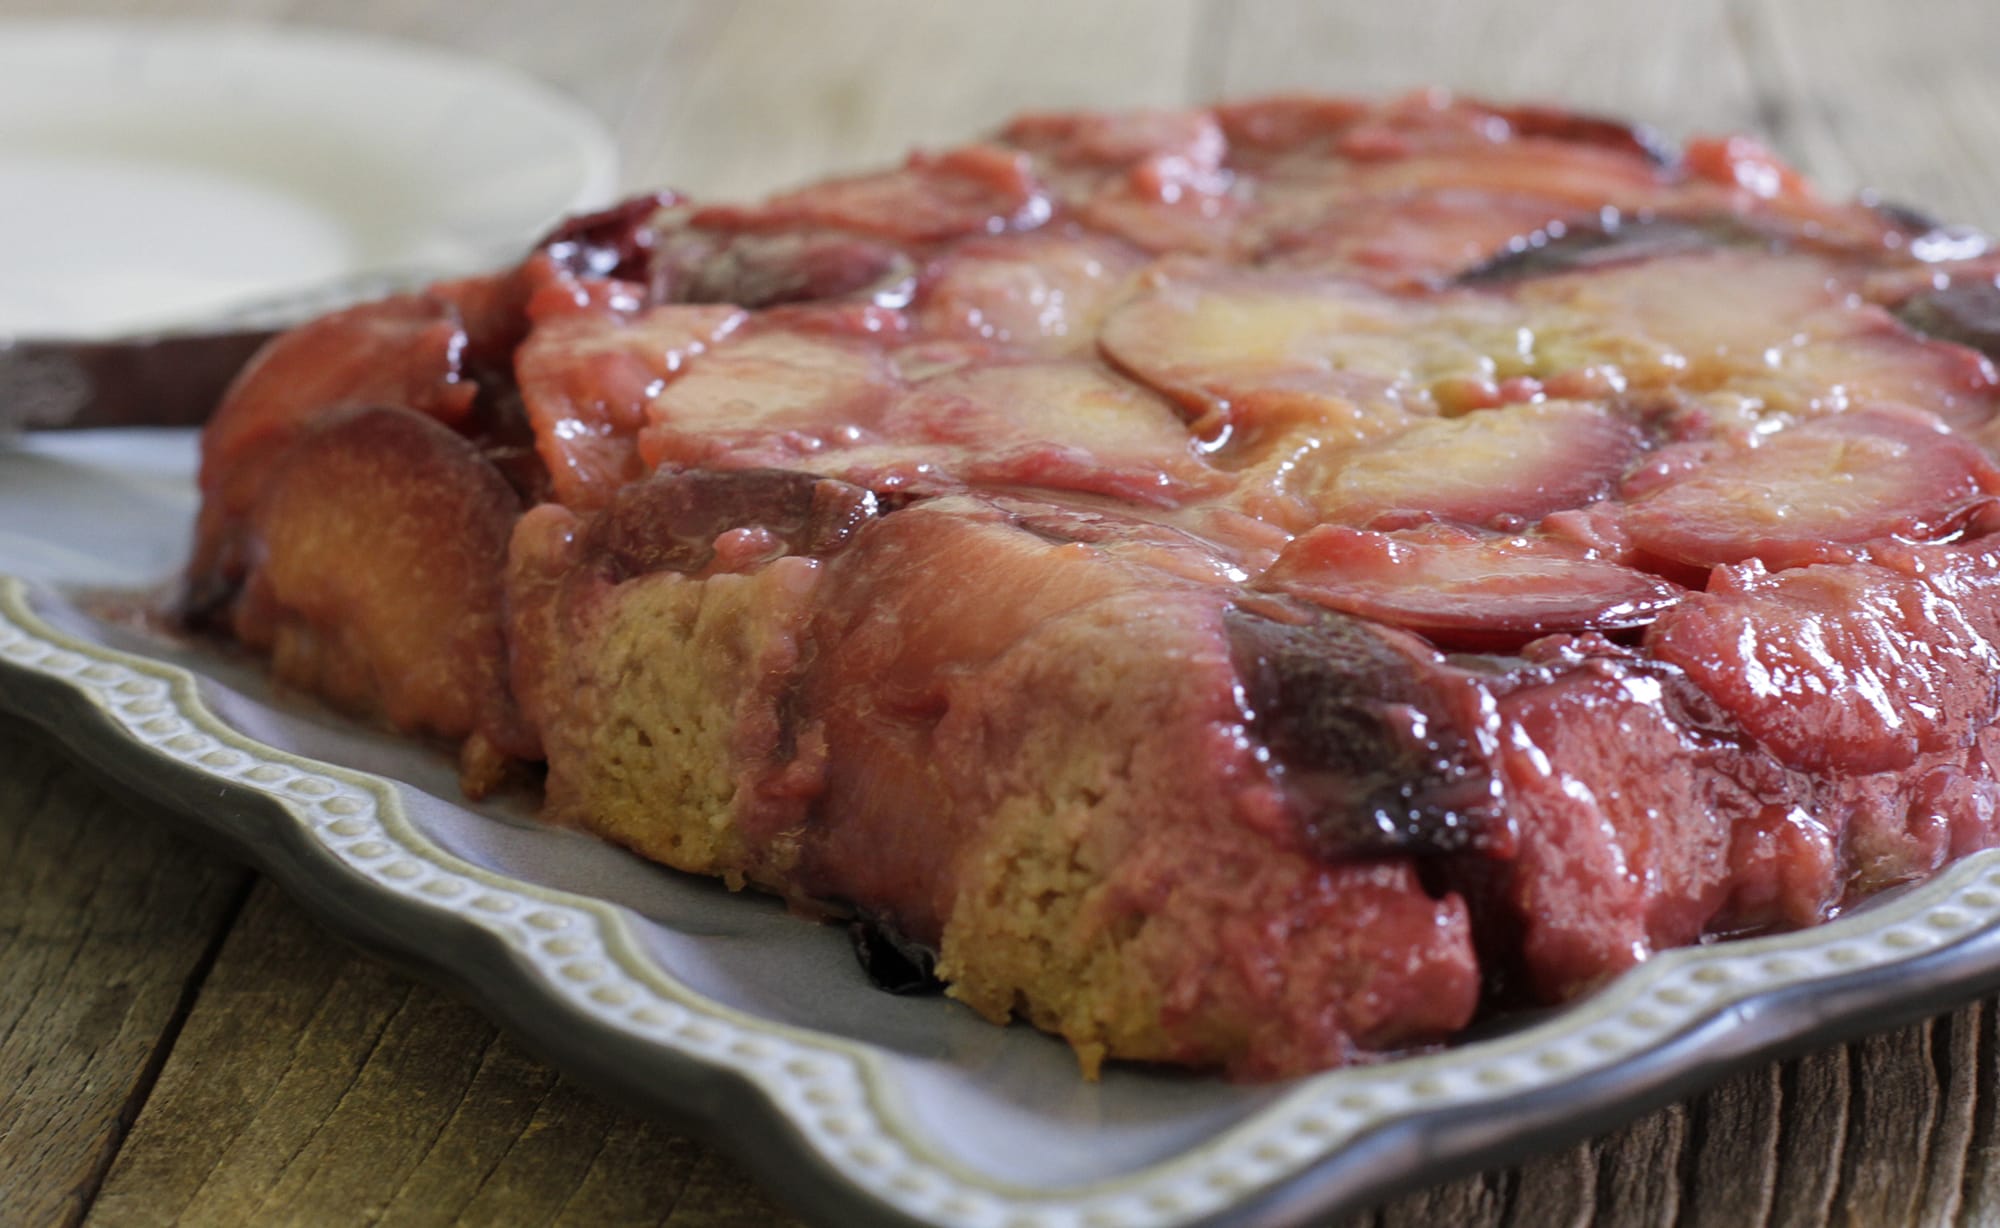 Plum upside-down cake can be elegant when you use a not-too-sweet batter made tender with olive oil and yogurt.